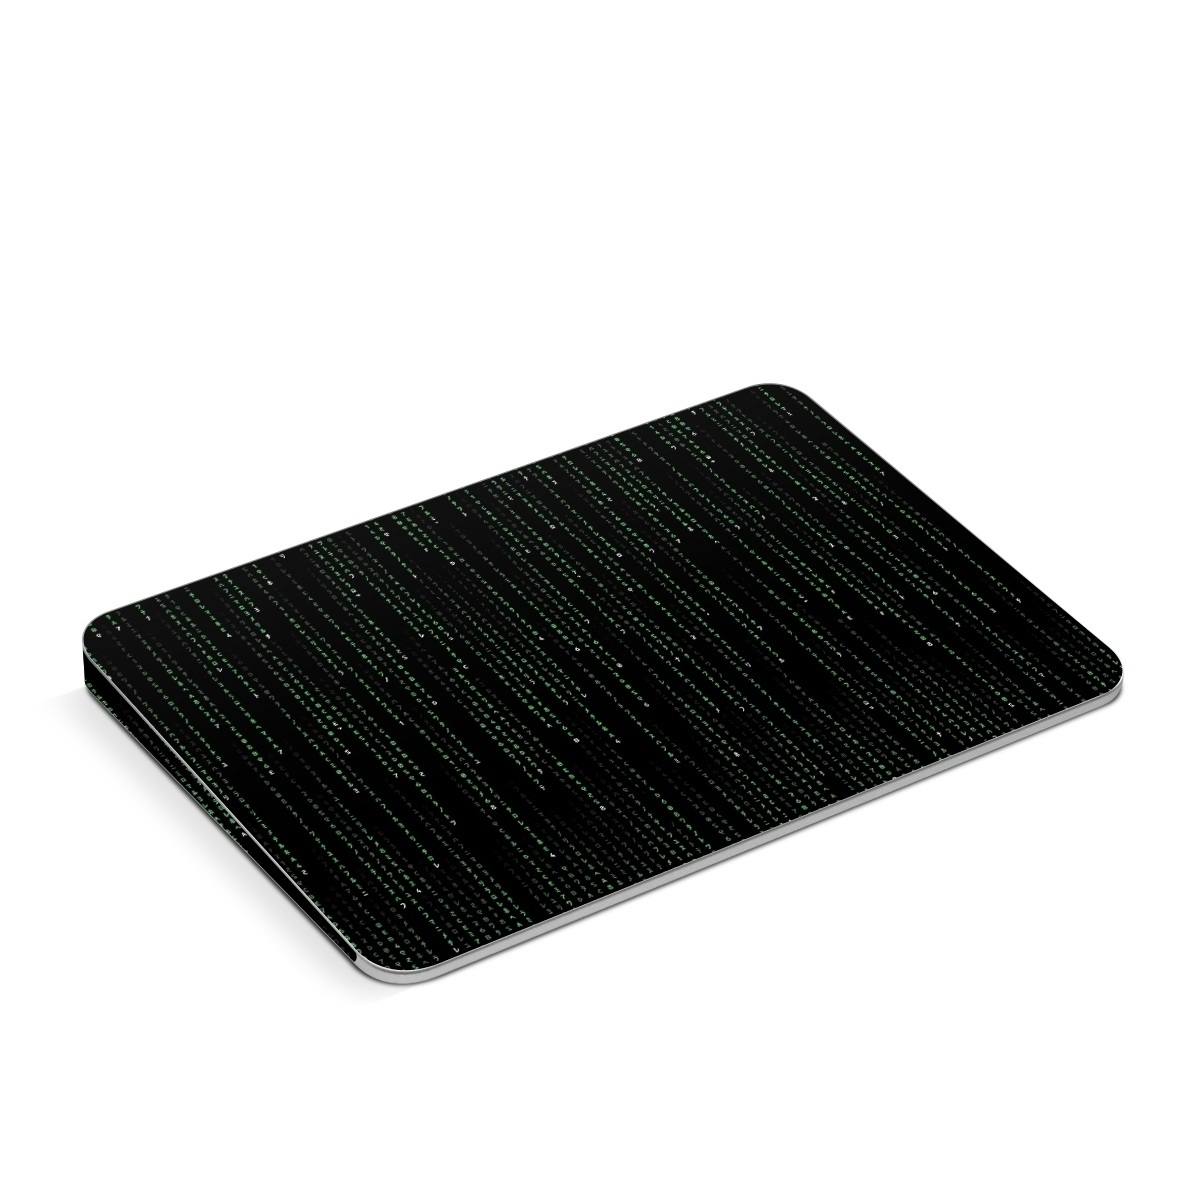 Apple Magic Trackpad 1 Skin design of Green, Black, Pattern, Symmetry with black colors